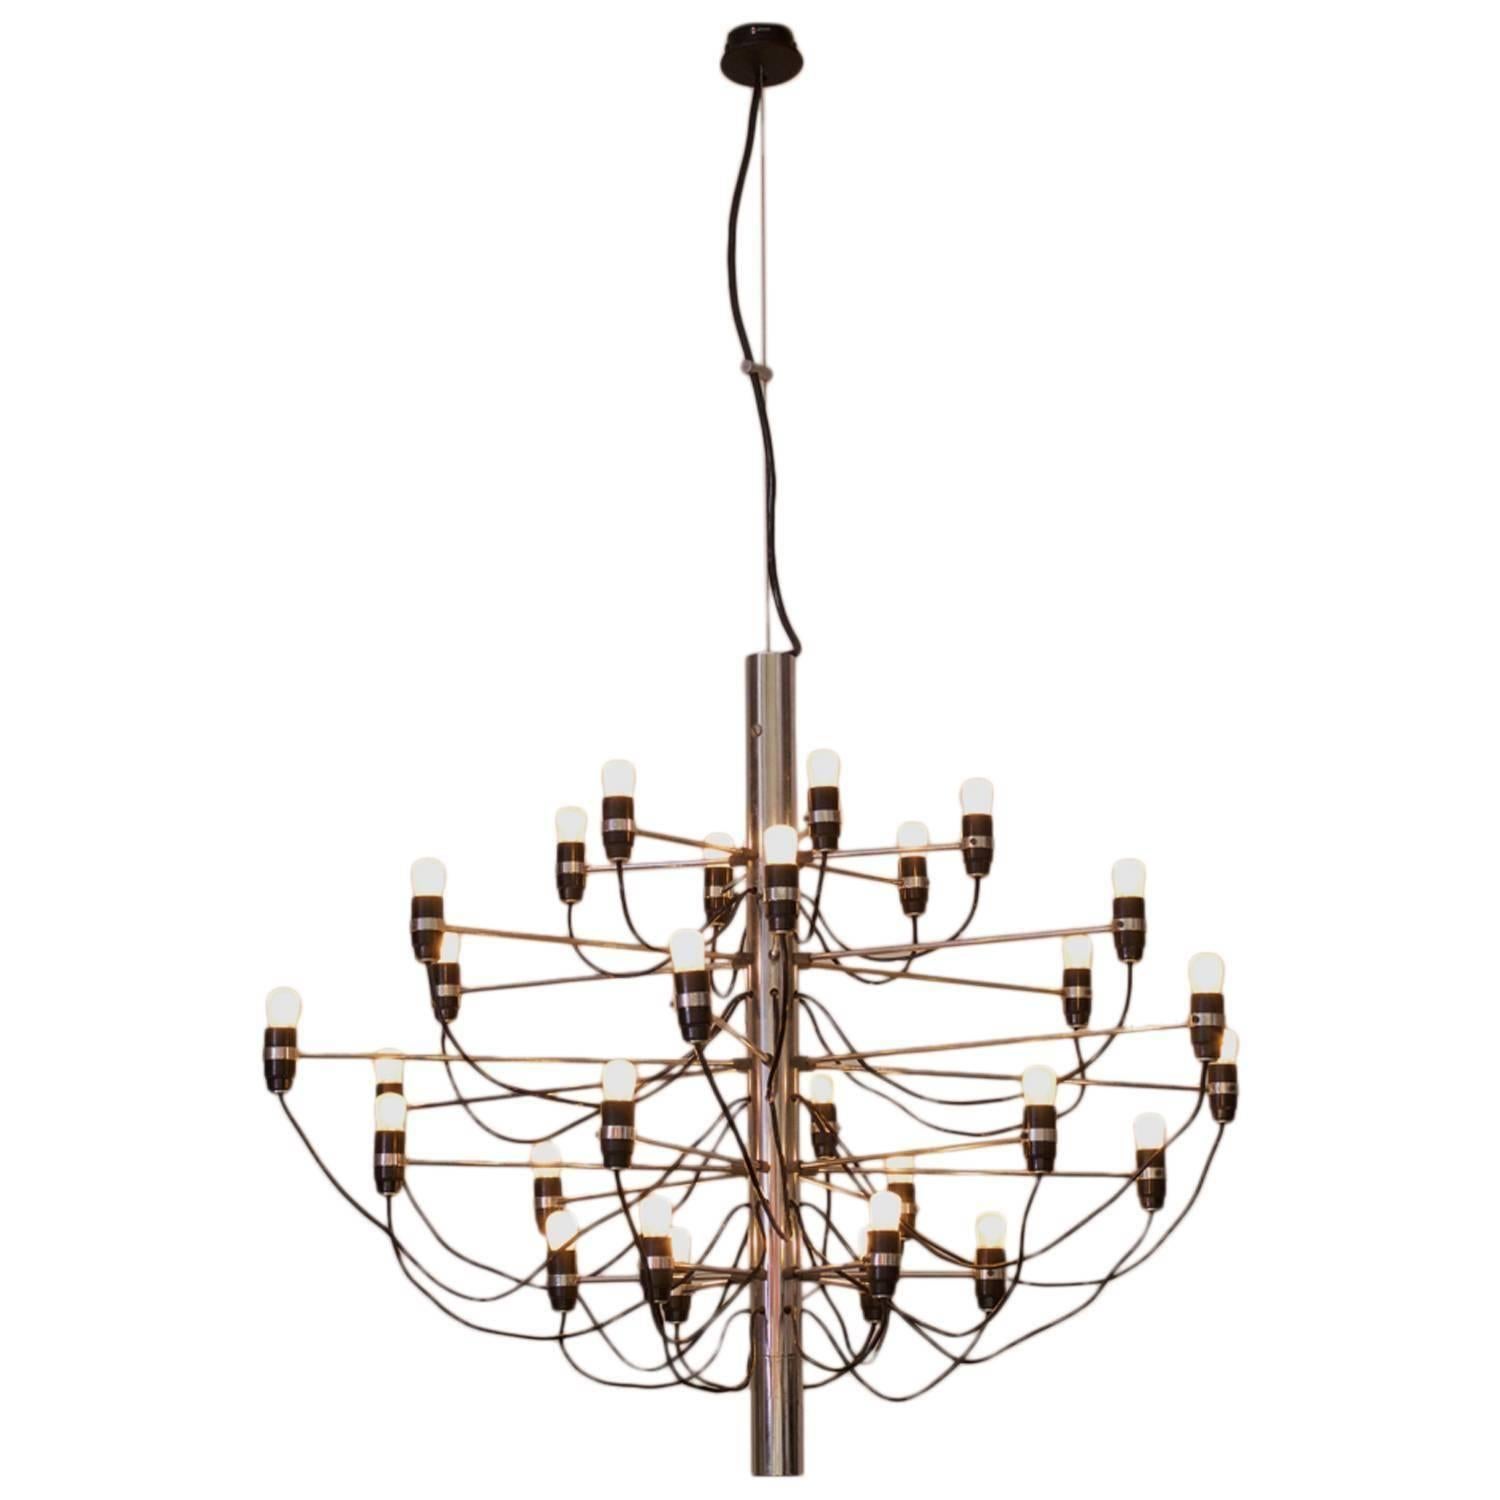 Early 2097/30 Chandelier by Gino Sarfatti for Arteluce